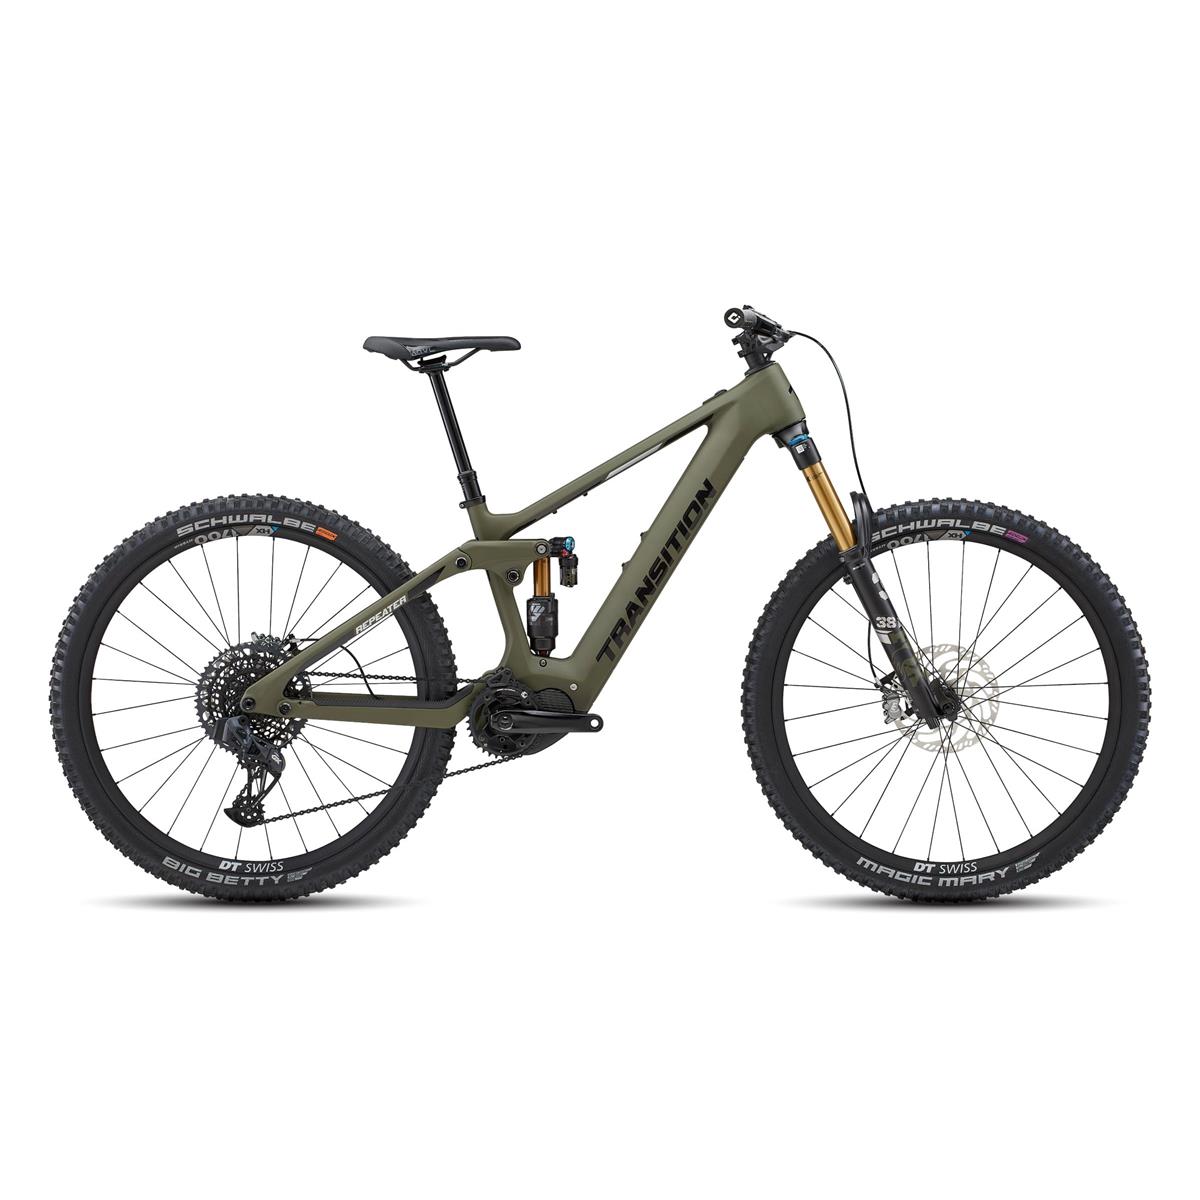 Repeater Carbon AXS 29'' 160mm 12s 630Wh Shimano EP8 Mossy Green Größe L